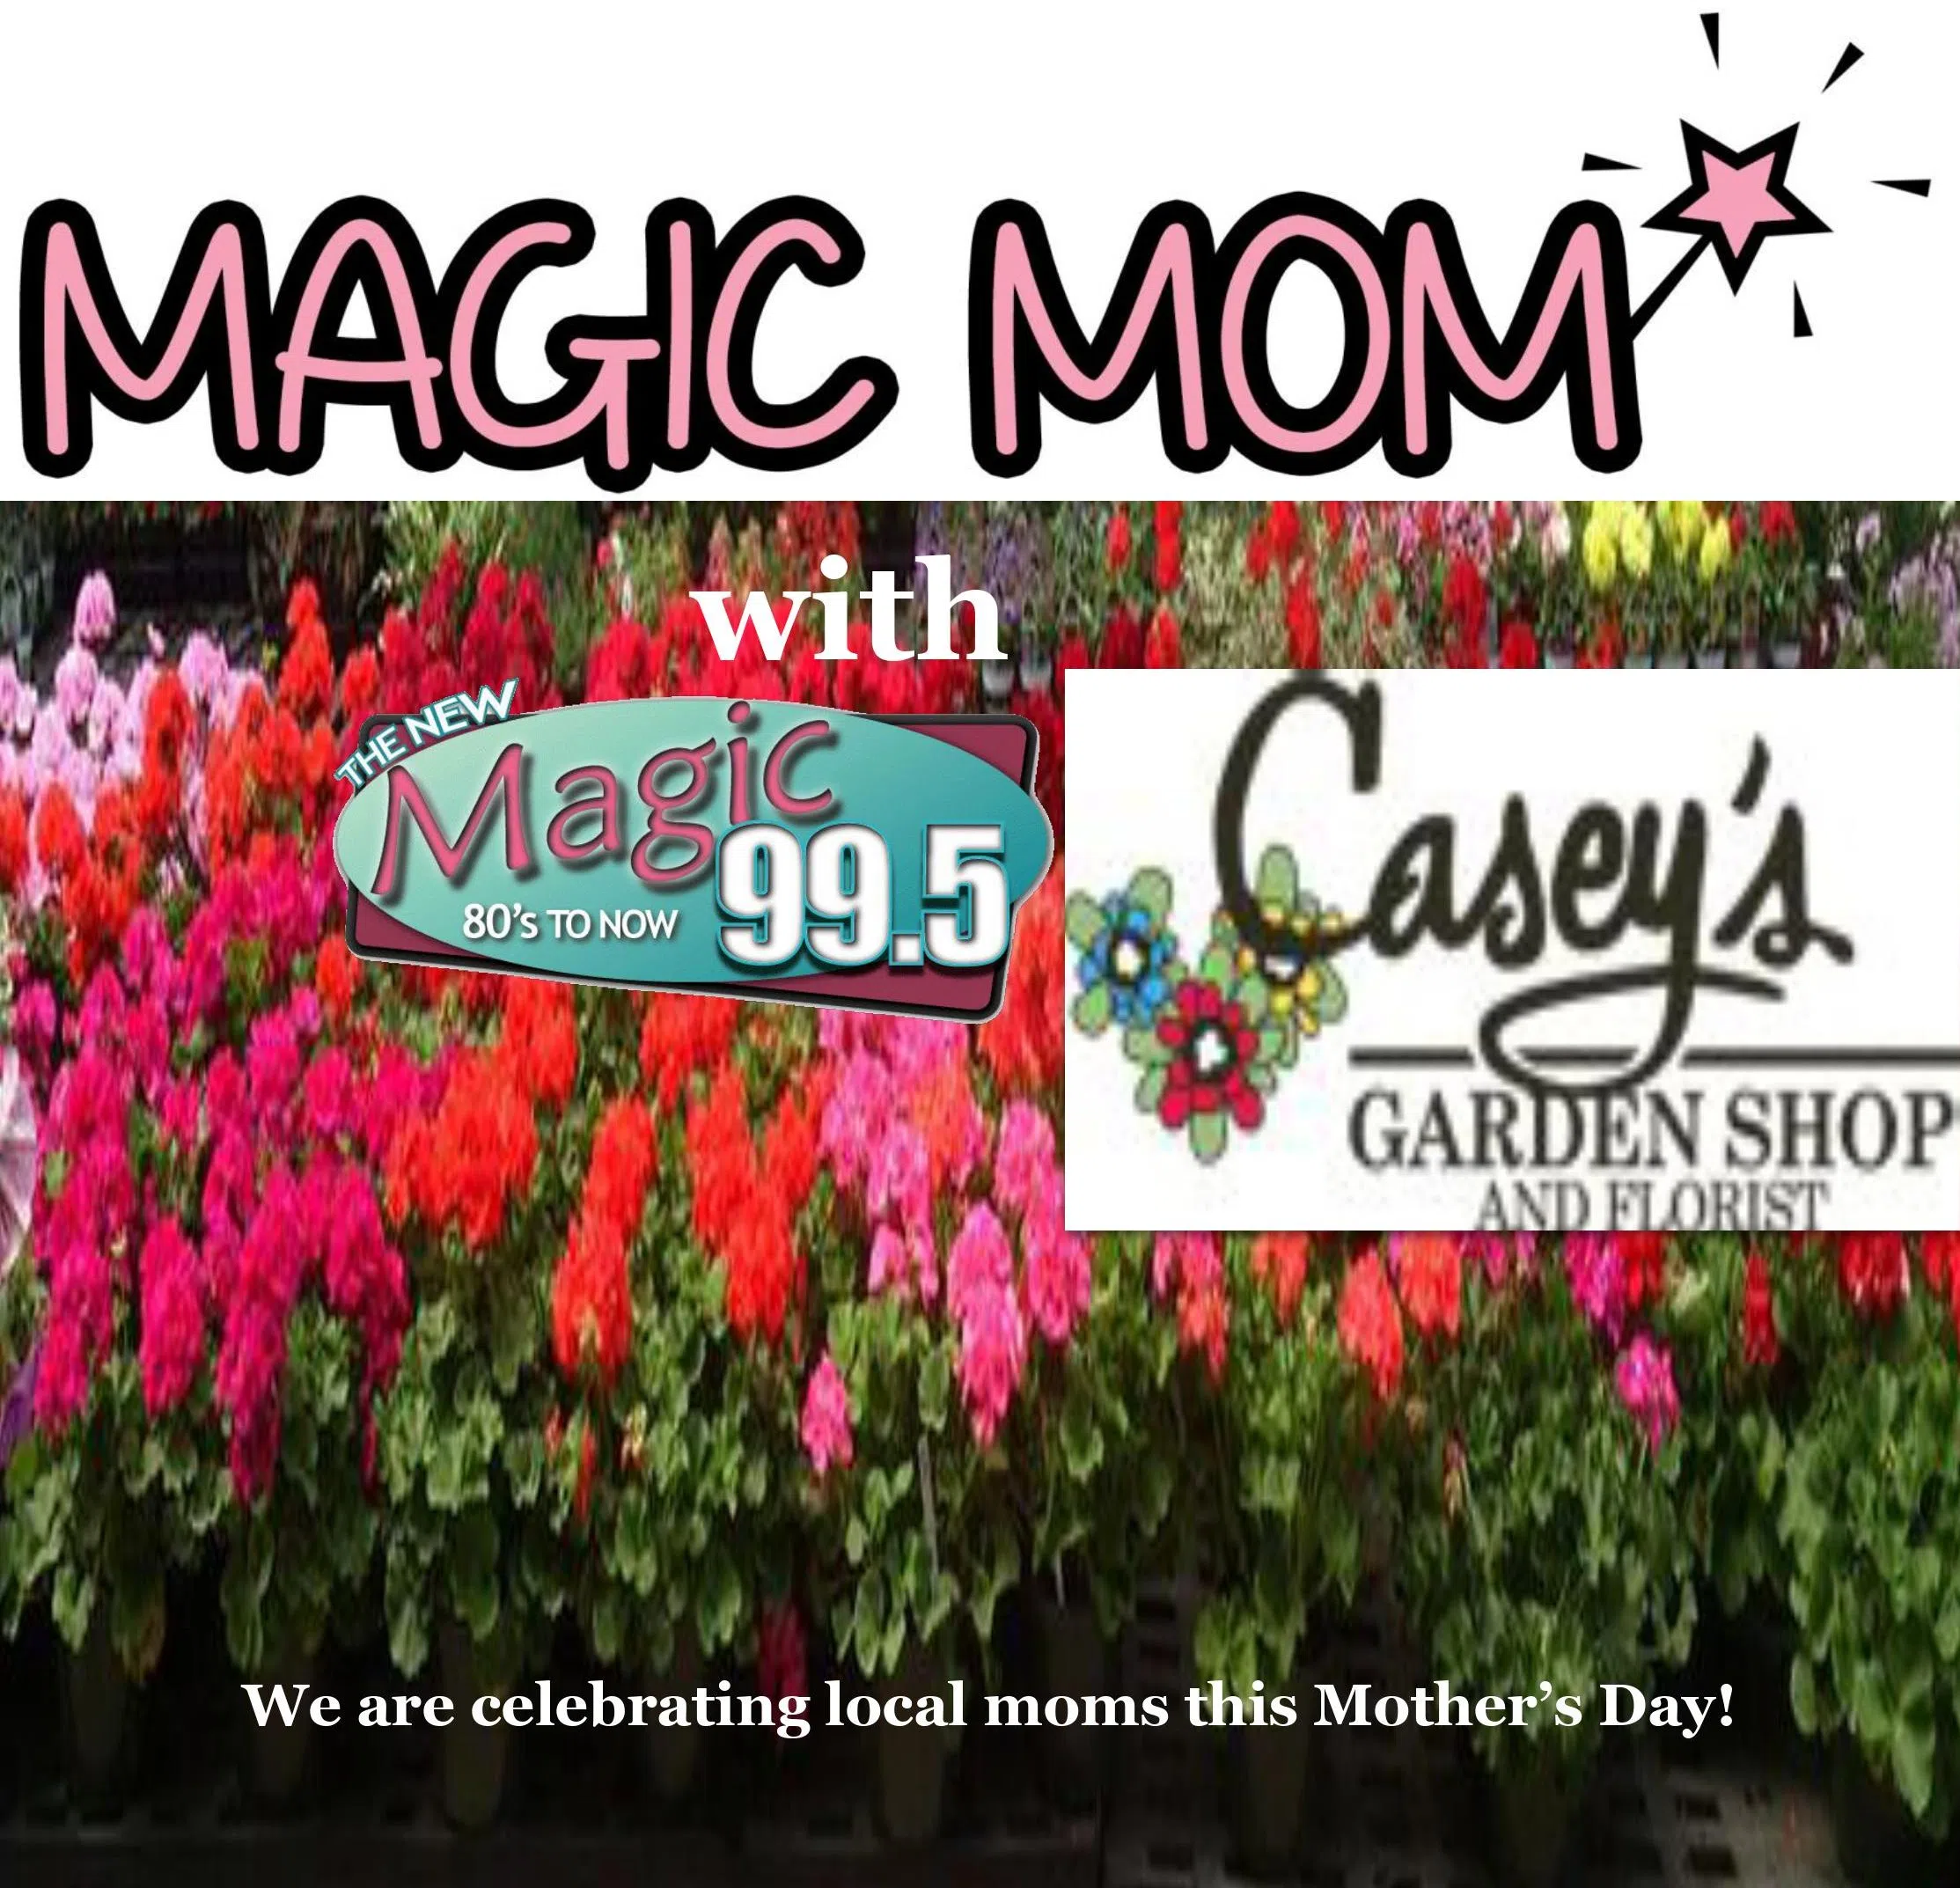 We are celebrating MAGIC MOMS this Mother's Day!